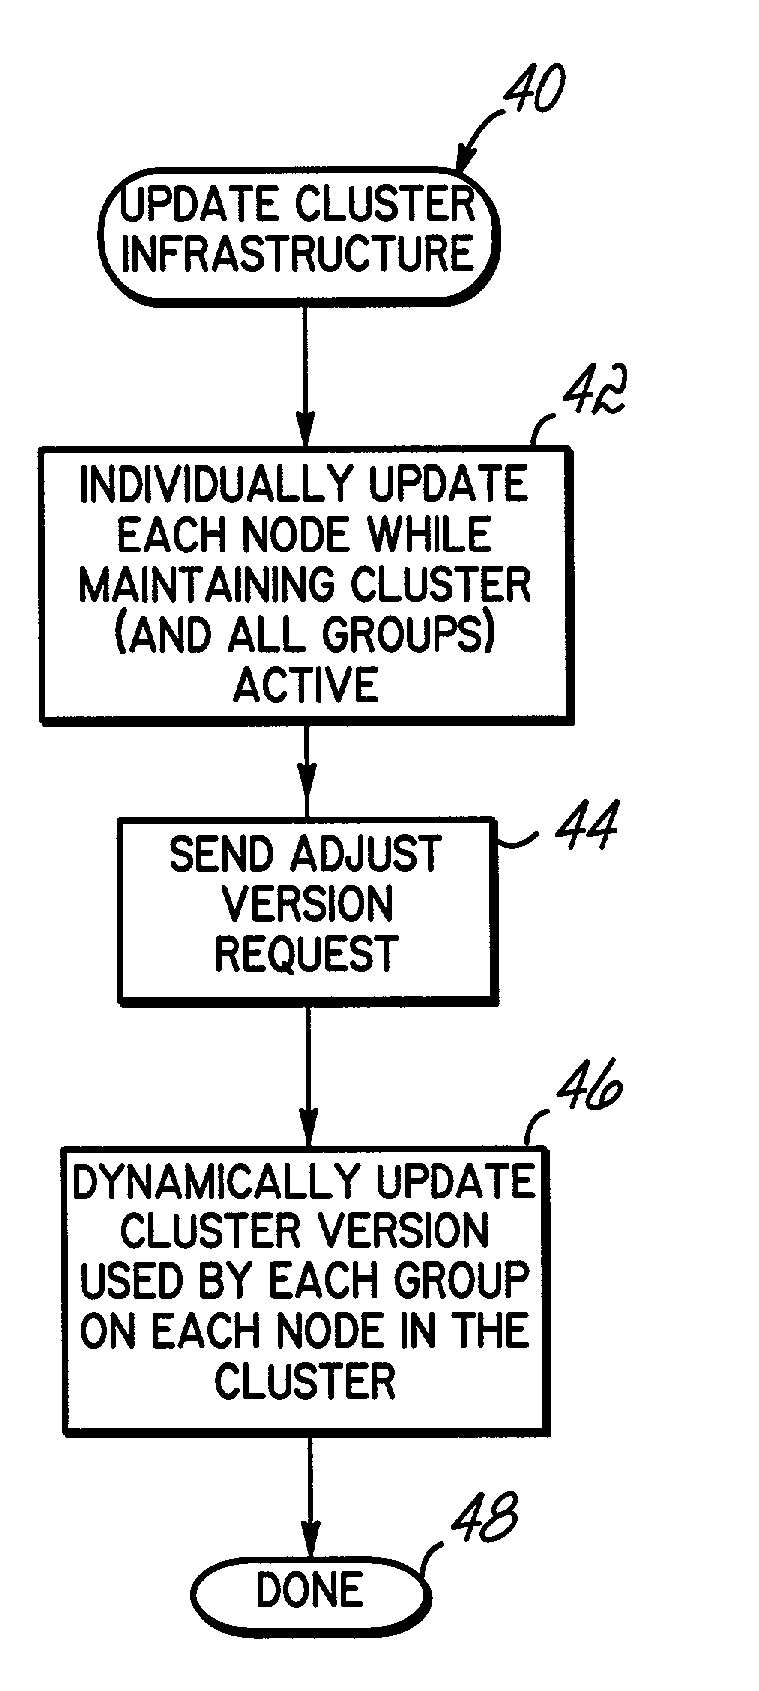 Dynamic cluster versioning for a group